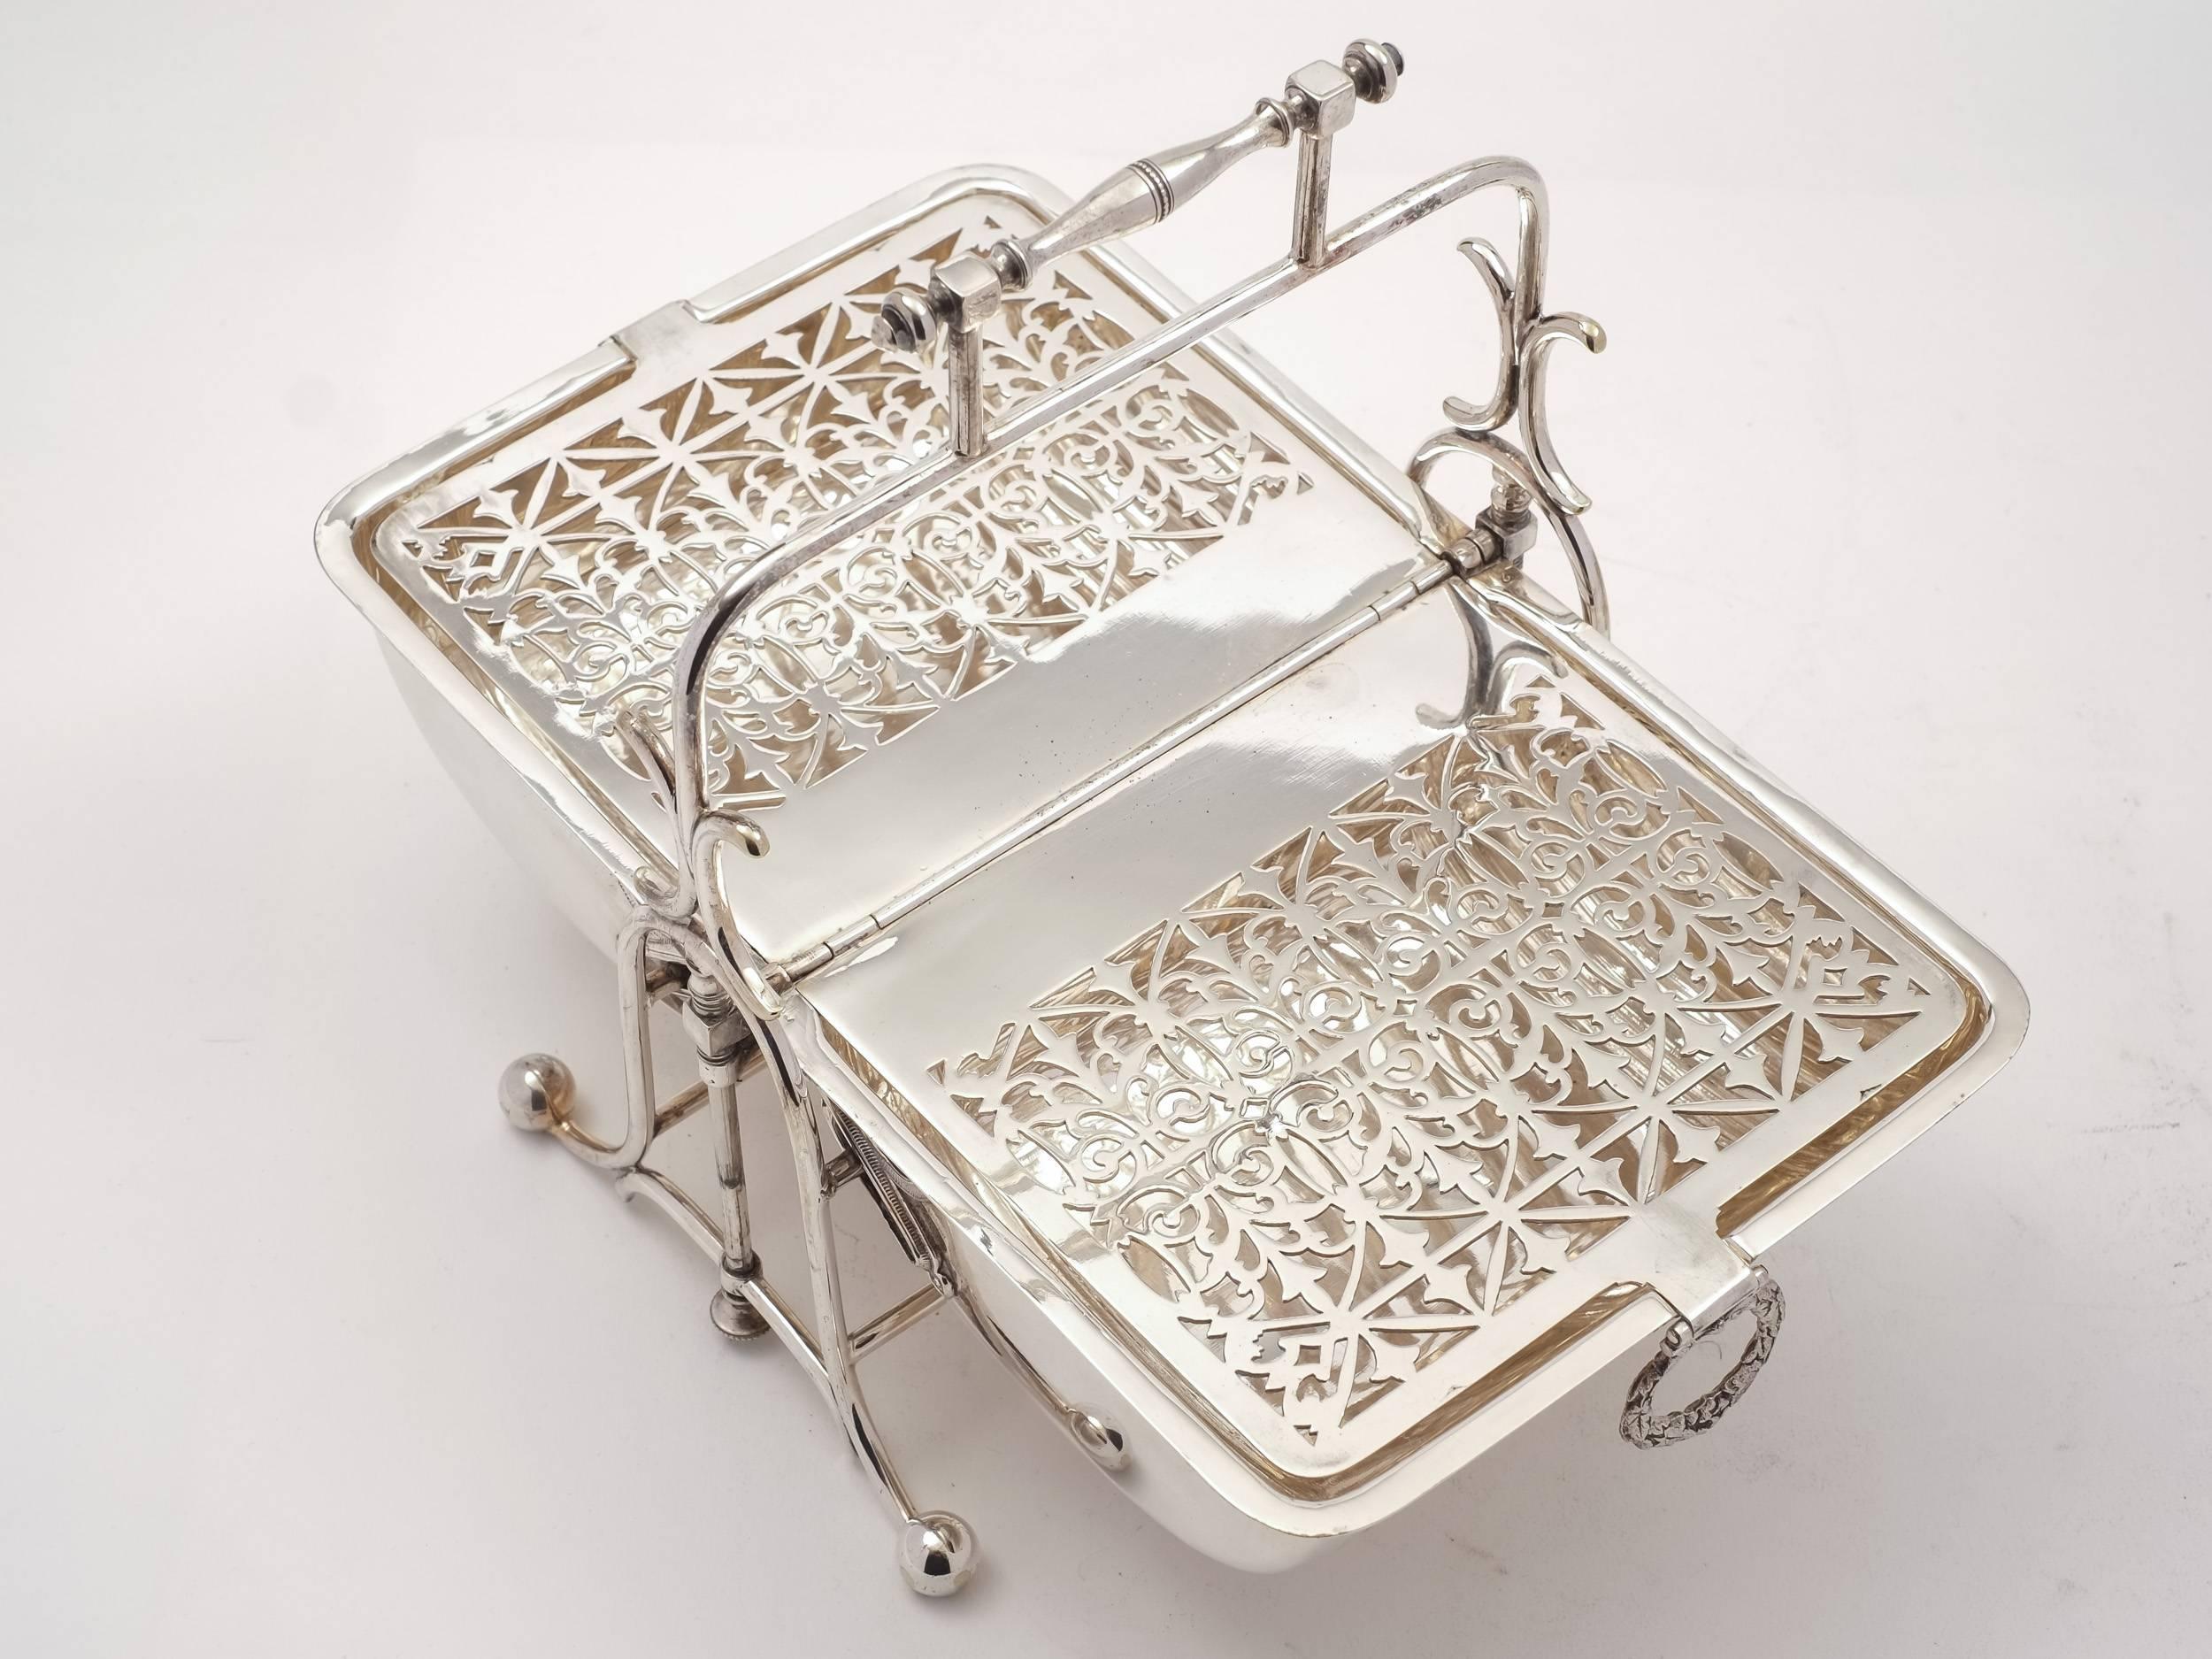 A fabulous English Victorian silver plated folding biscuit or cookie box which sits in frame and has carrying handle. When opened, two biscuit compartments with pierced lids are revealed. The lids (which secure the biscuits) fold up to centre to